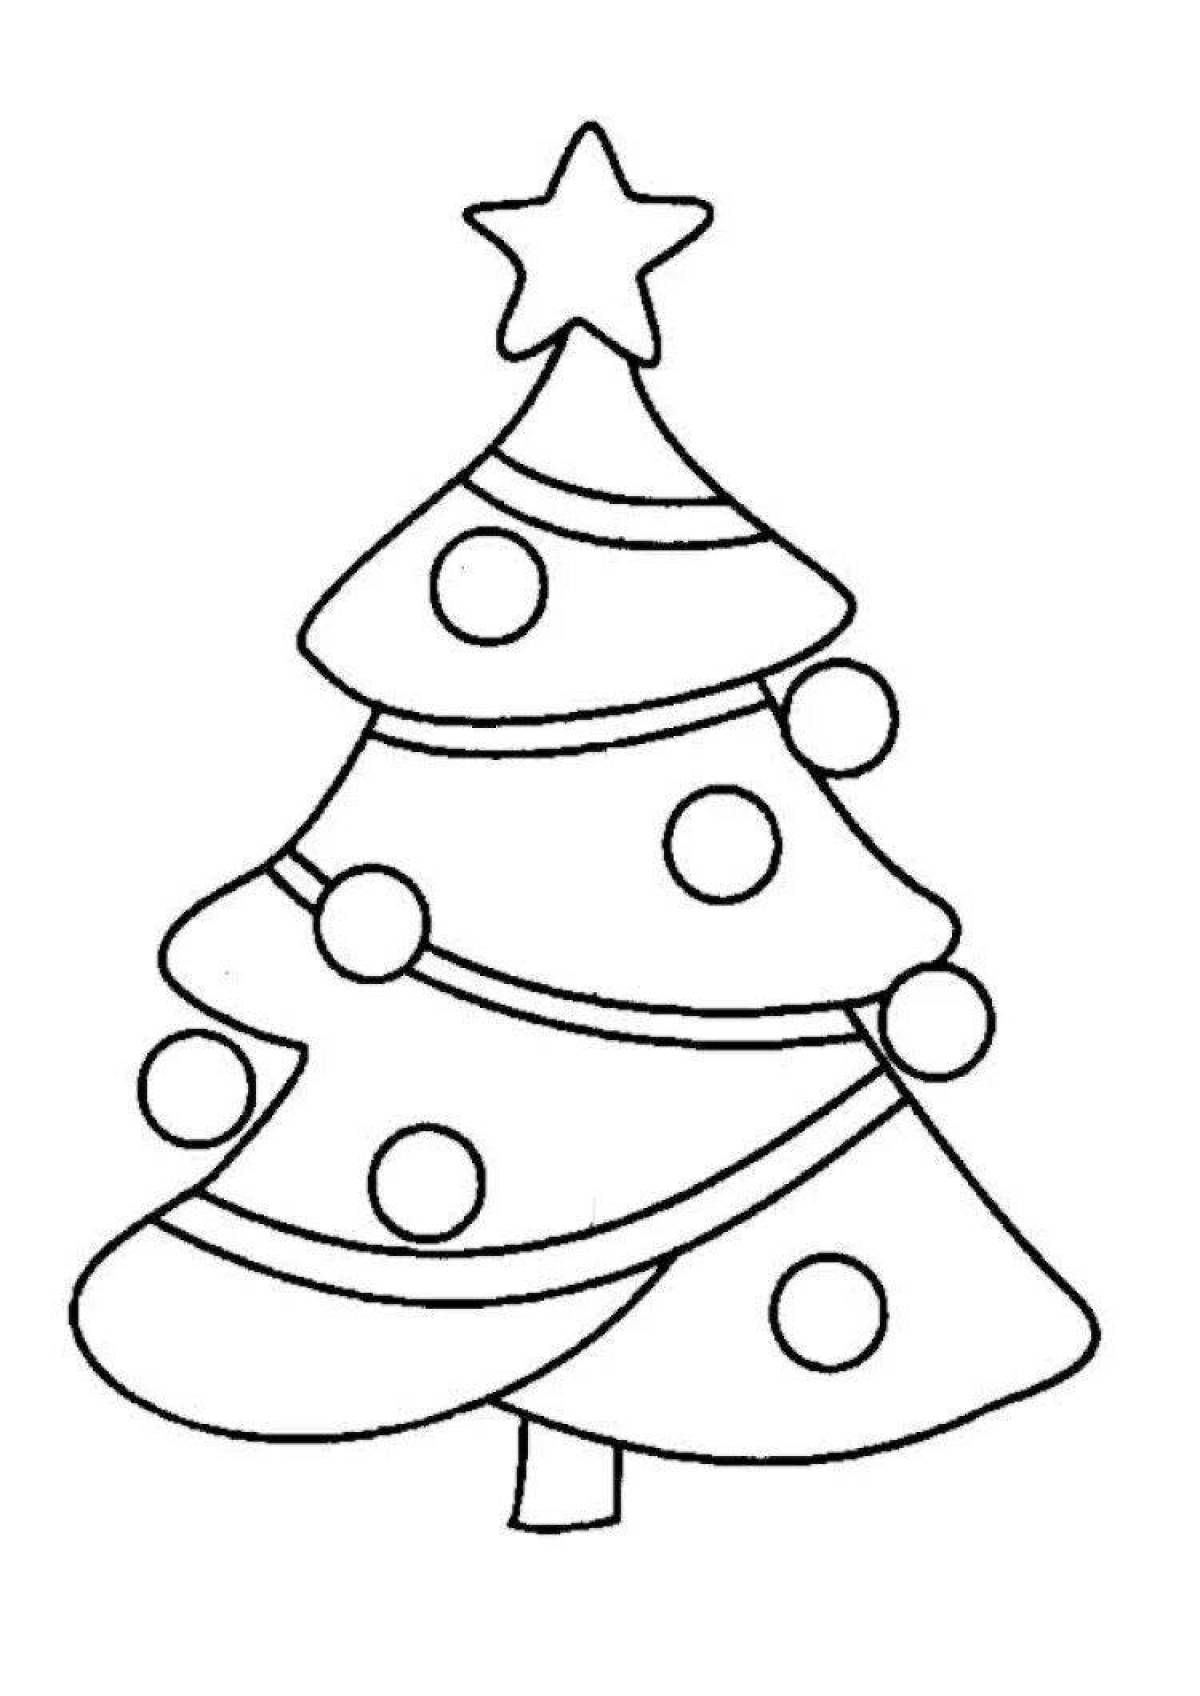 Christmas crafts with colorful coloring pages